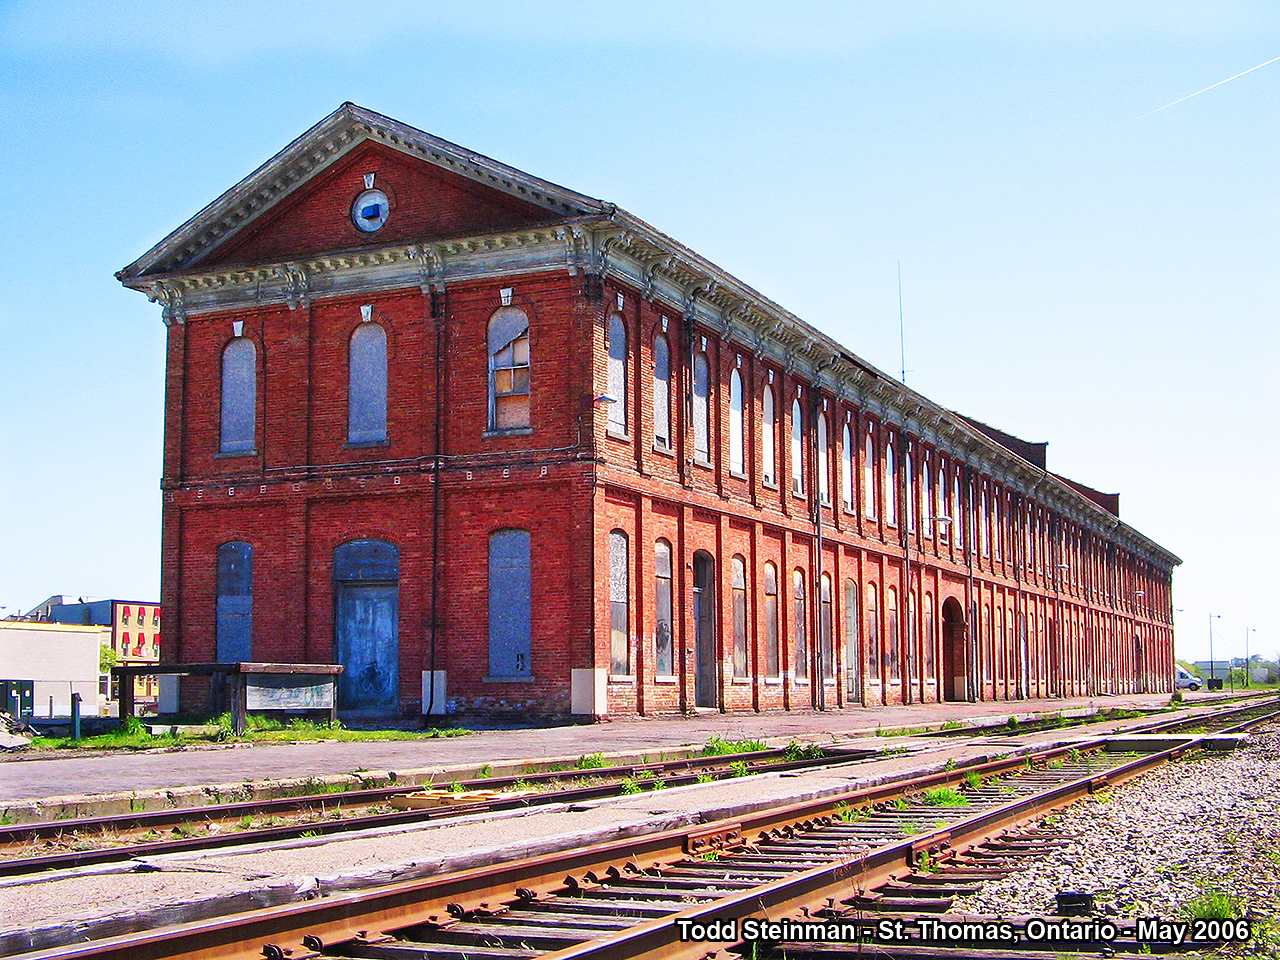 THE GRAND OLD LADY!  When the Michigan Central Railway completed it's line through Southwestern Ontario between Windsor and Fort Erie (the Canada Southern), it built it's finest and largest structure at St. Thomas. Complete with an extensive yard and railway shop, it housed the HQ for the railway as well as being the largest station located in Ontario. From Elizabeth Wilmot's book "When Any Time Was Train Time", she wrote that the St. Thomas station's entire length took up a whole city block! There is definately no other station like it. 
Eventually, the decline and unsteady ownership of the Canada Southern led to it's demise, and after owners such as the New York Central, which became Penn Central - then Conrail to CP and finally CN, the station lost some of it's architectural features and eventually was boarded up for good.  Not the same outcome for the former railway shops, as they now house the Elgin County Railway Museum. 
But all was not lost for the station. A group came forward with a plan to restore the station. Slowly though the last few years, the station received a new roof, and work began restoring the interior to it's former glory. Today the station can be used as a banquet hall, as work still continues to have it fully restored. Sadly, the remaining rail was torn out only a few years ago. The Canada Southern is no more, except fro the few feet of steel that remain in front of the station and run over to the museum. 
The museum is well worth the visit with it's various rolling stock, artifacts, signage, etc. The station is still photo-worthy, while majority of the former roadbed is now a trail for bikers and those who enjoy a good walk.